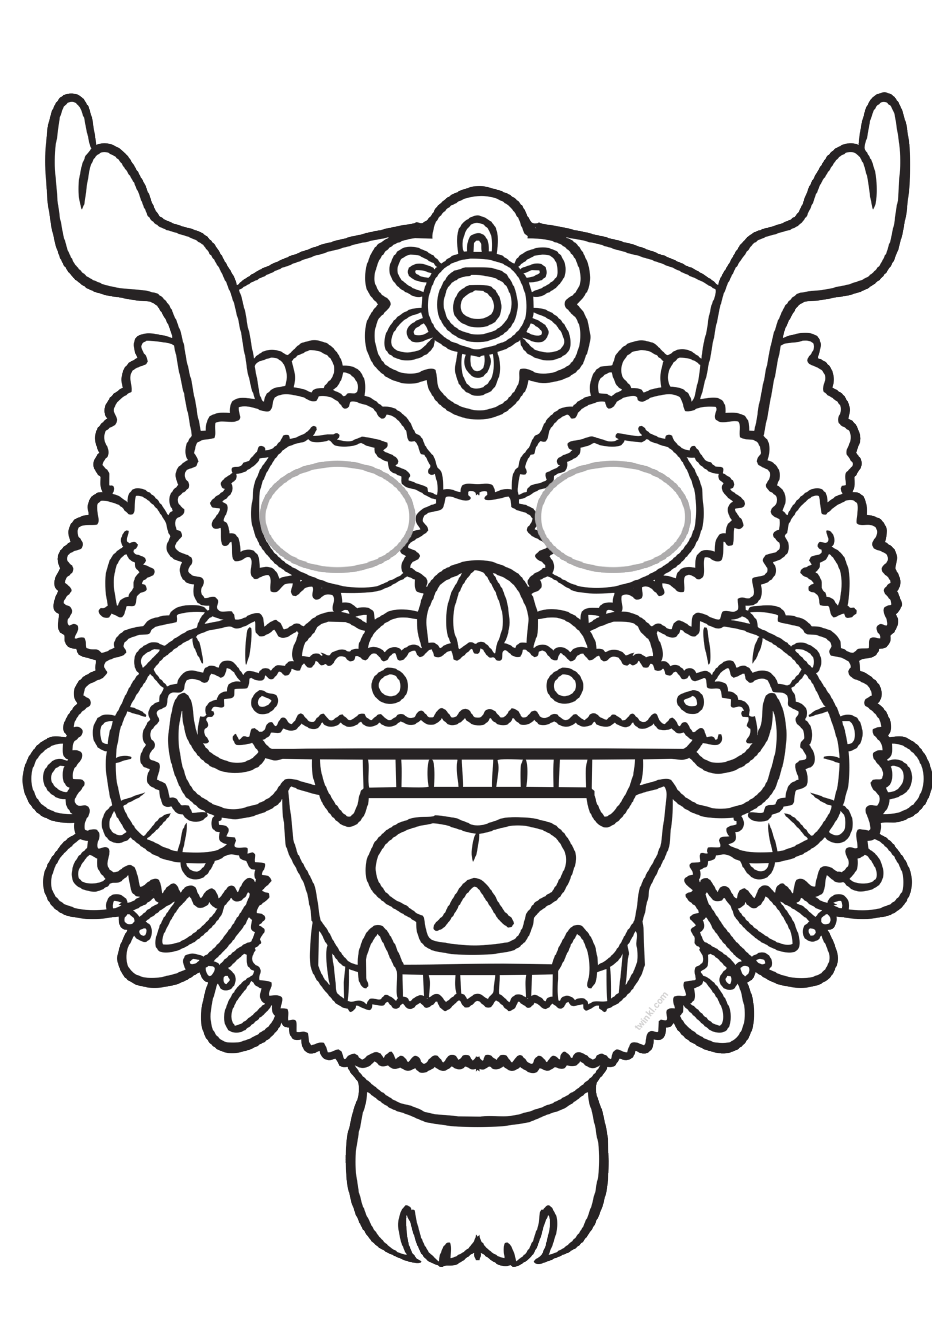 Chinese Dragon Mask Coloring Template, Page 1